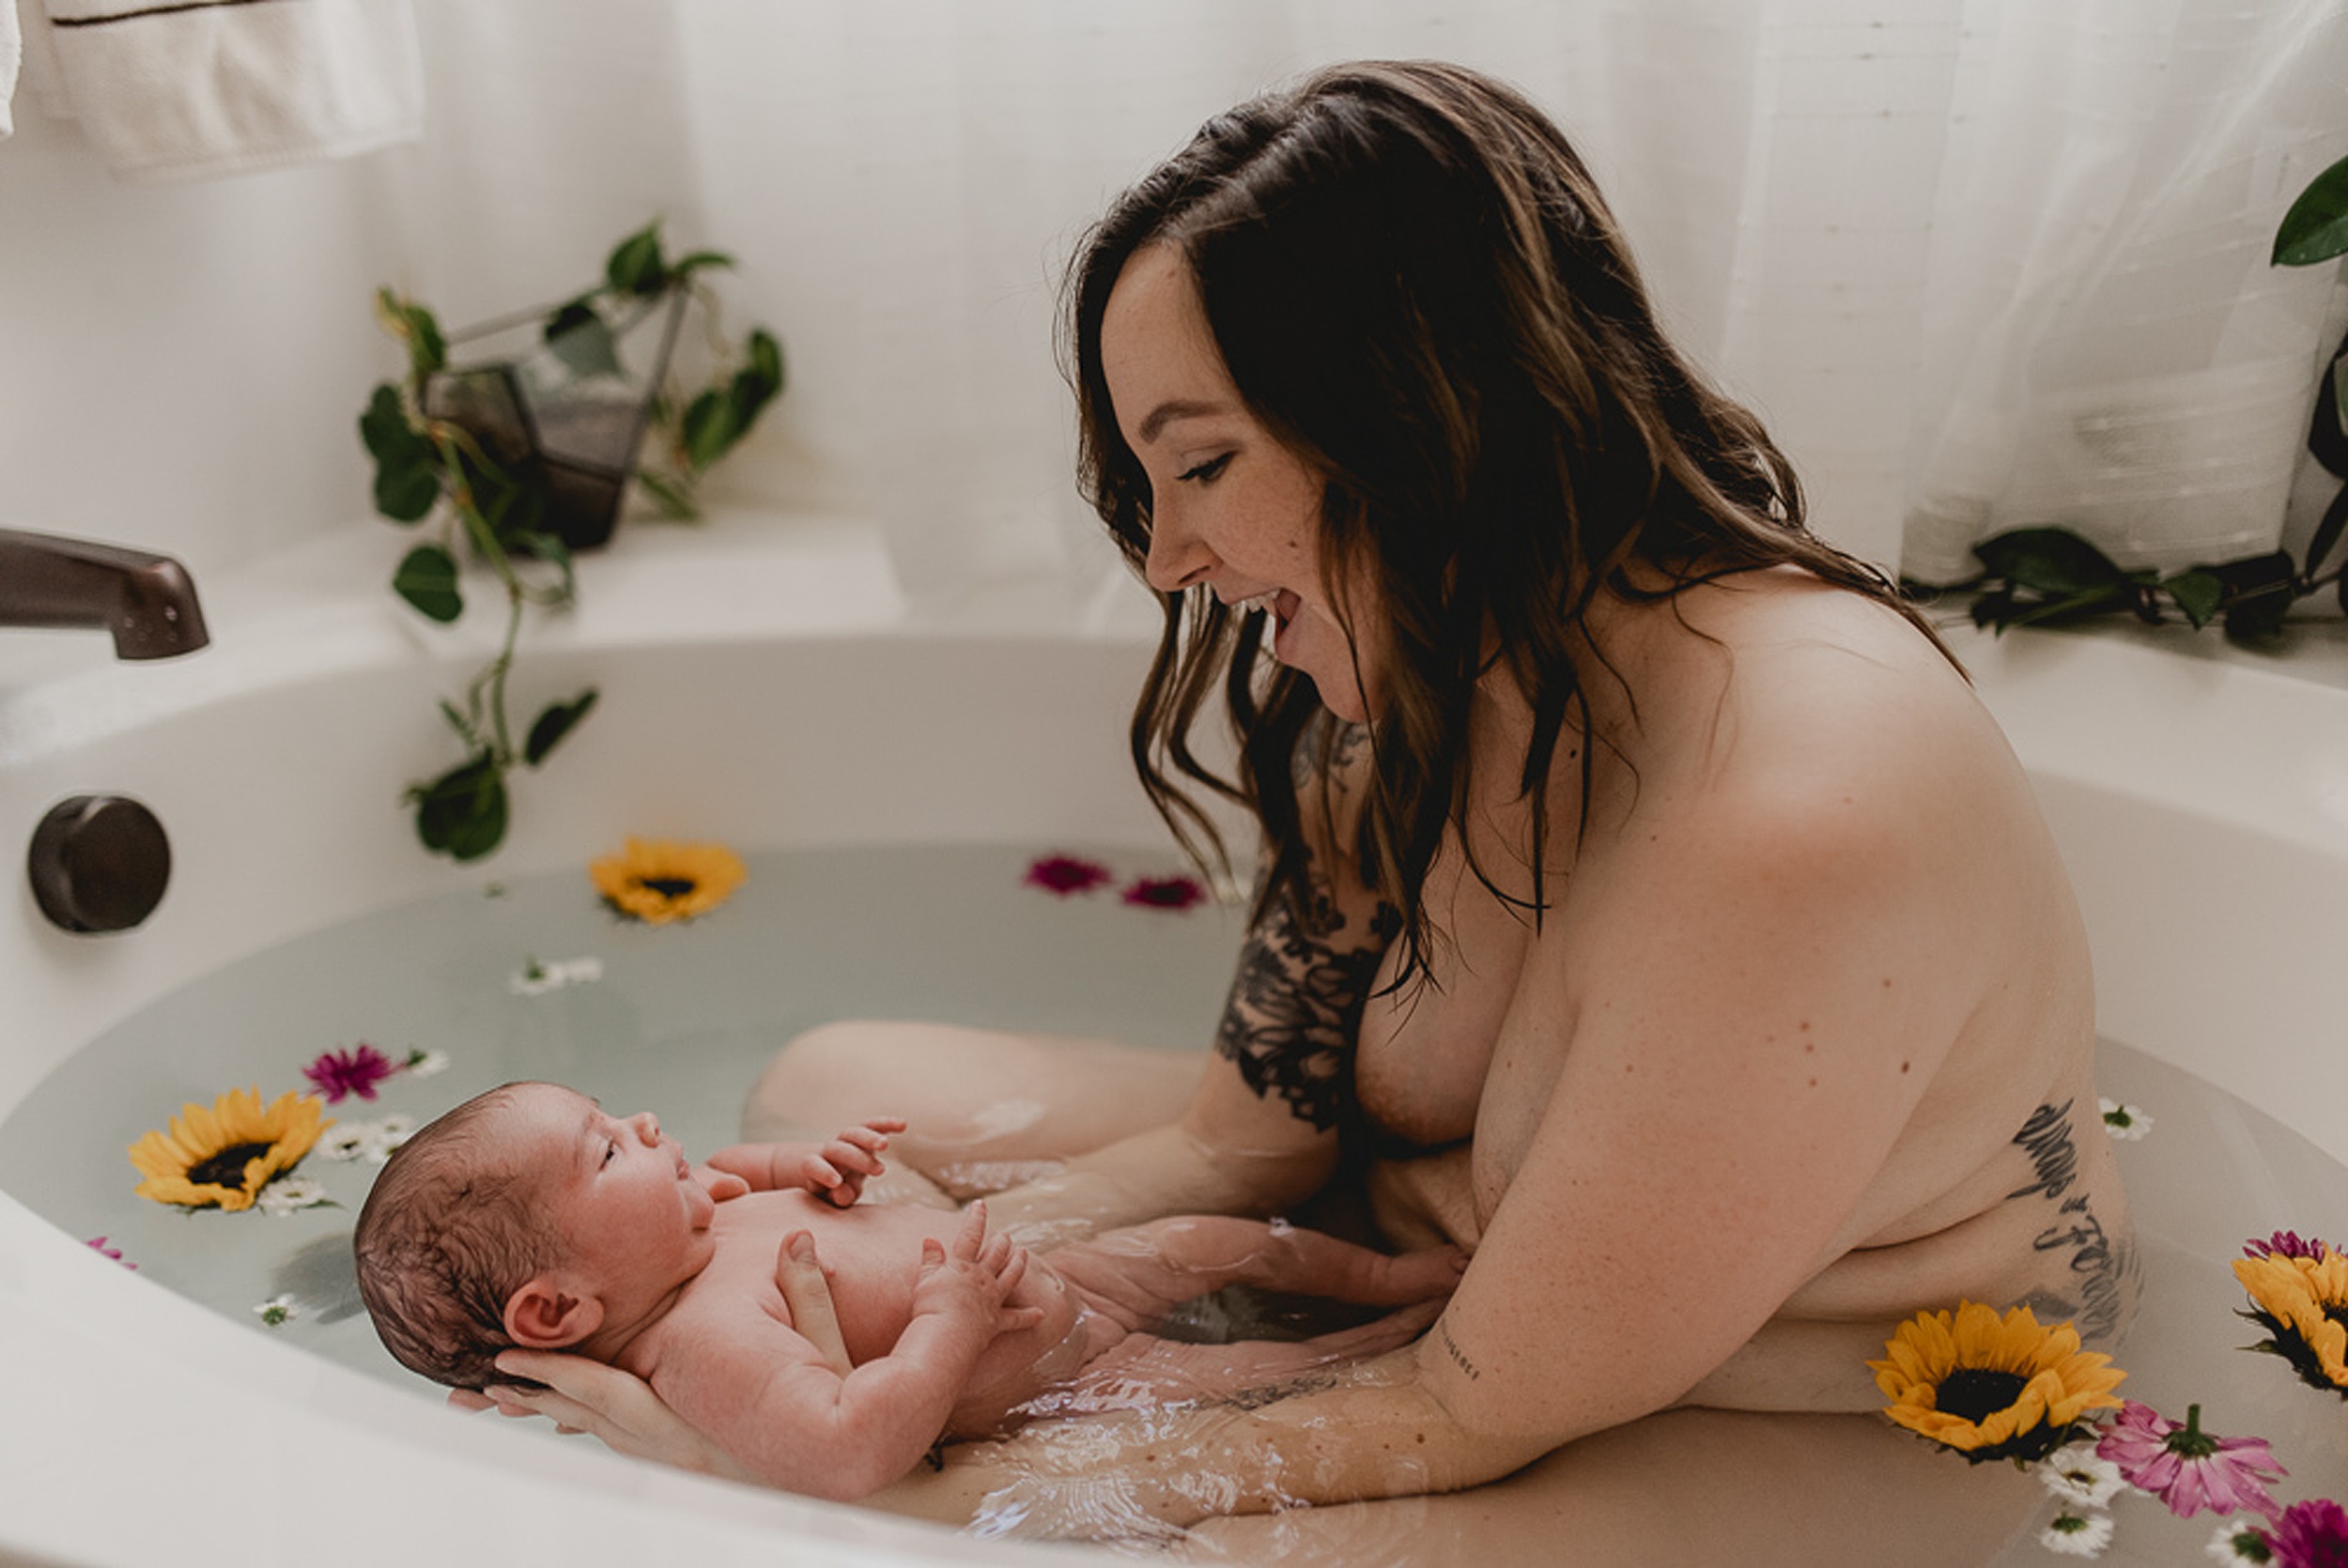 A new mom laughs and plays with her newborn baby while sitting in a bathtub surrounded by flowers